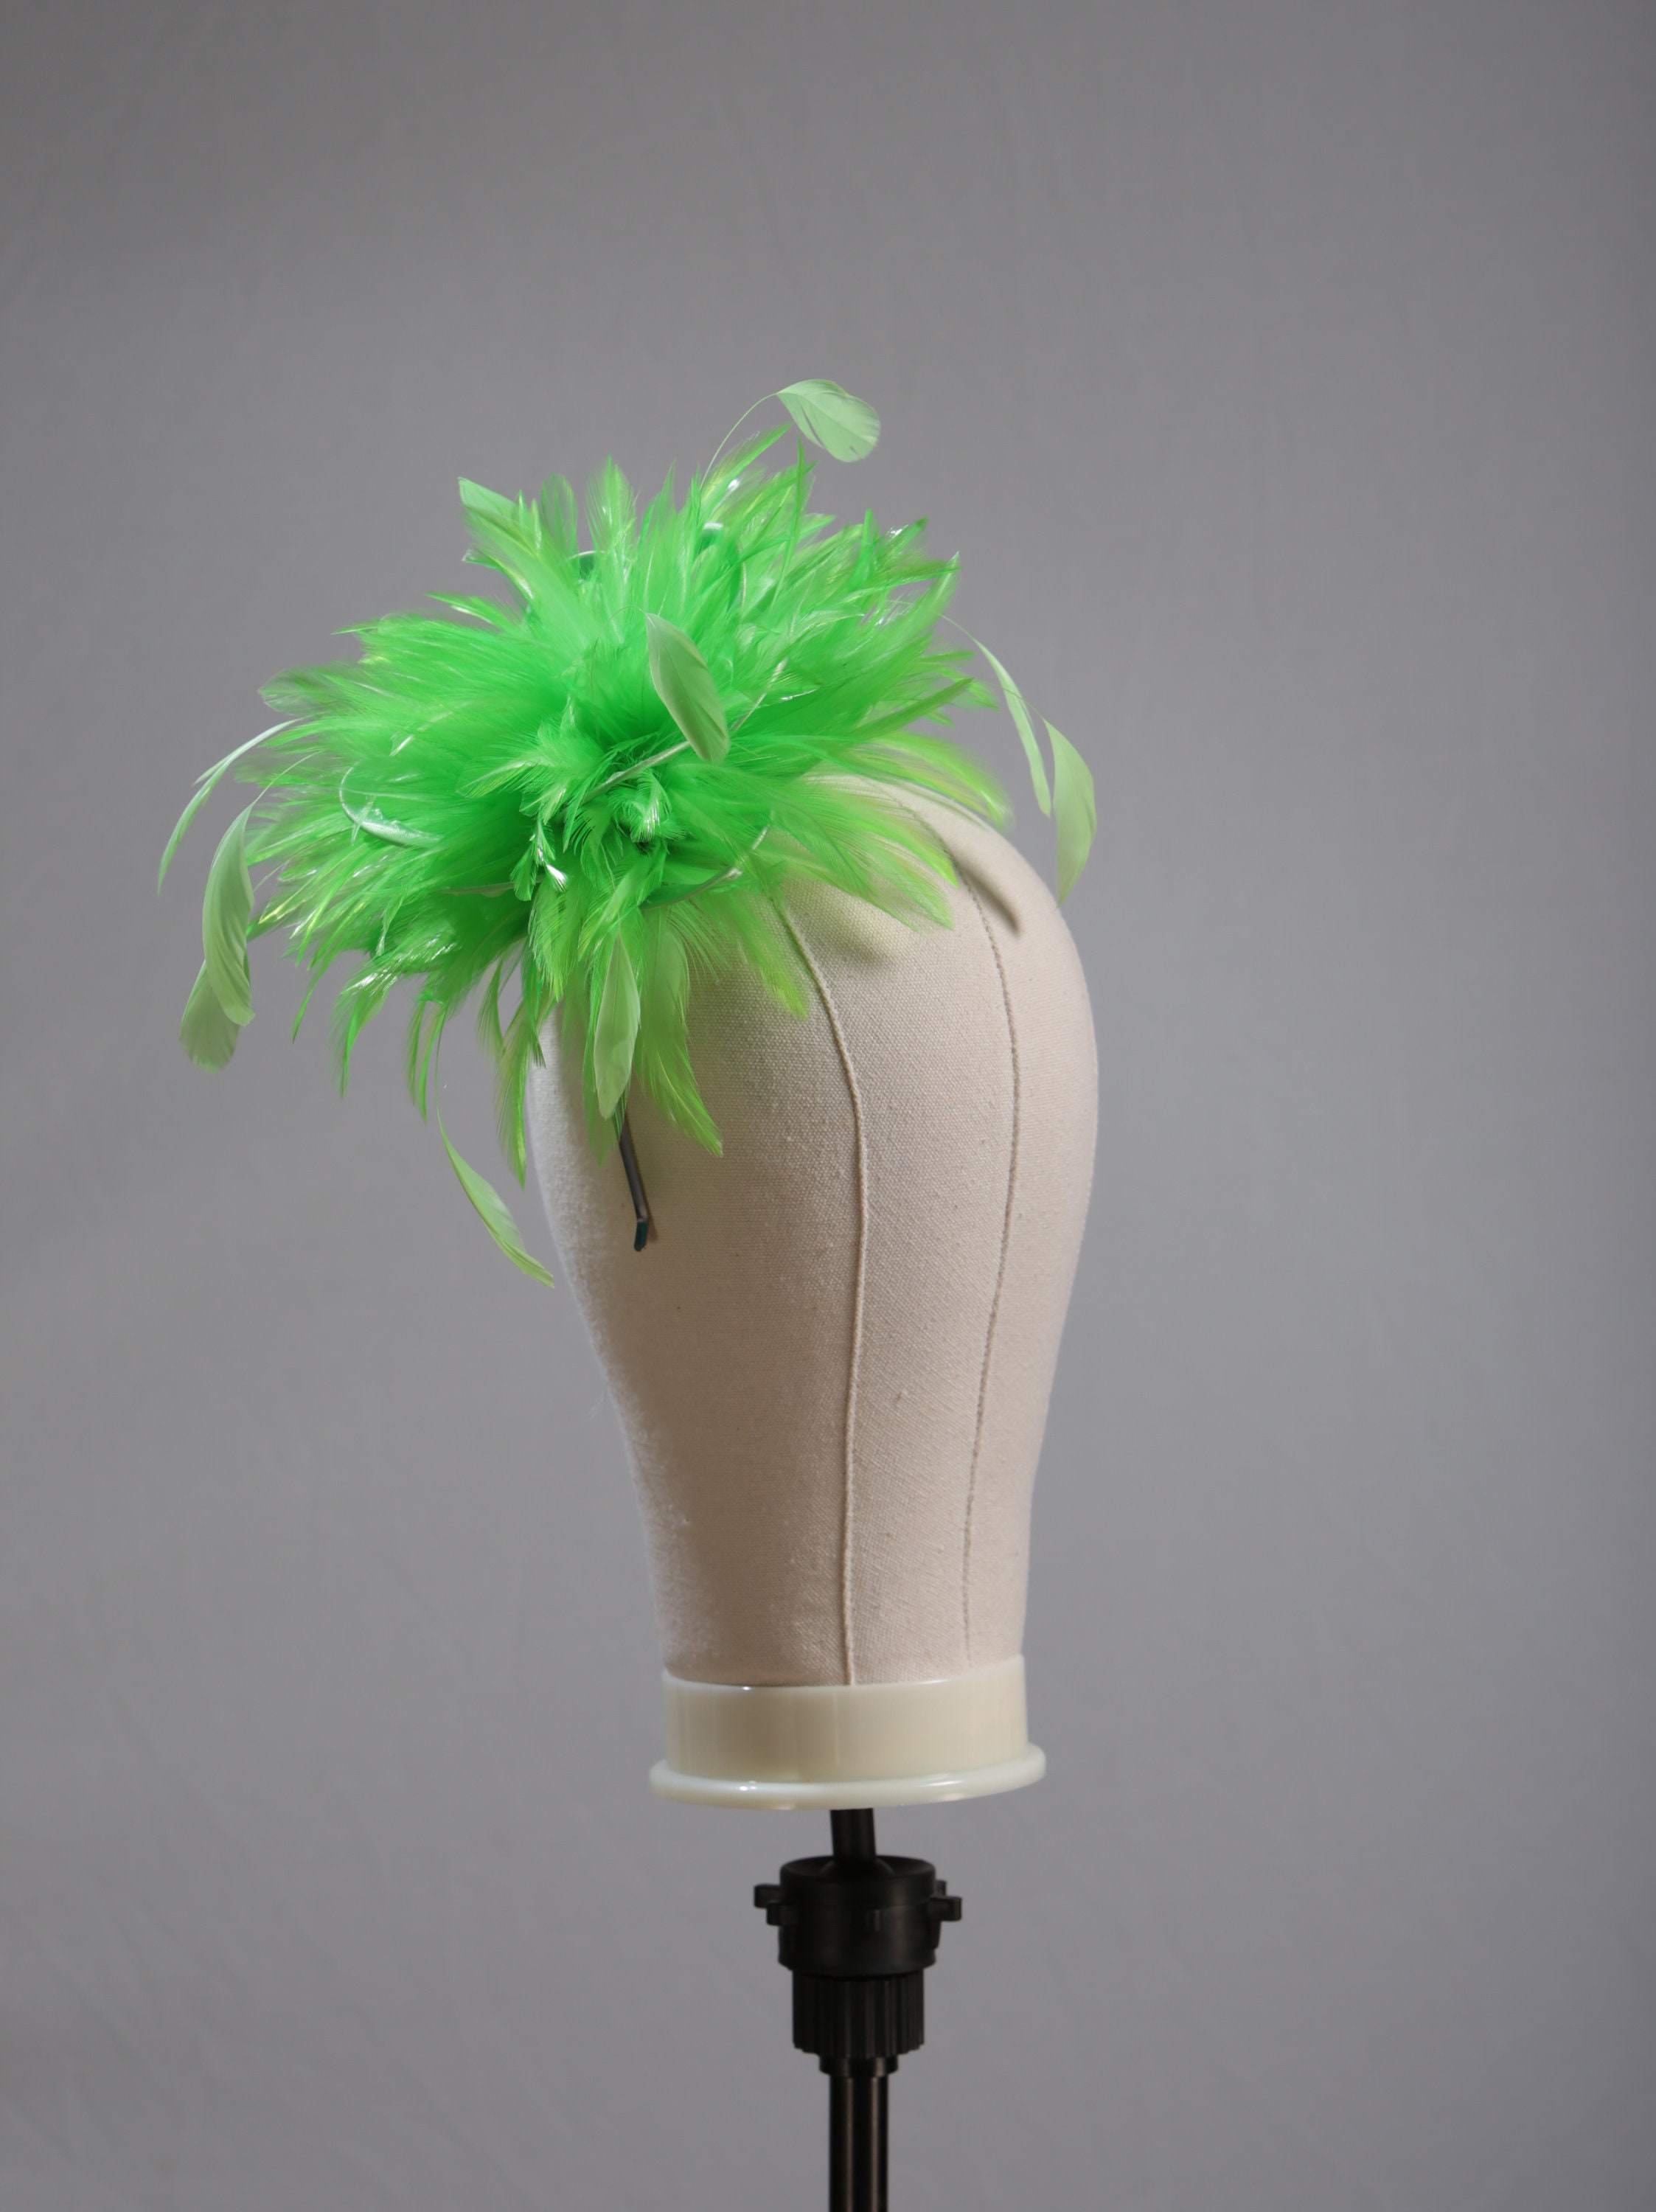 Apple Lime Green Feather Fascinator Hat Wedding, Ladies Day Choose